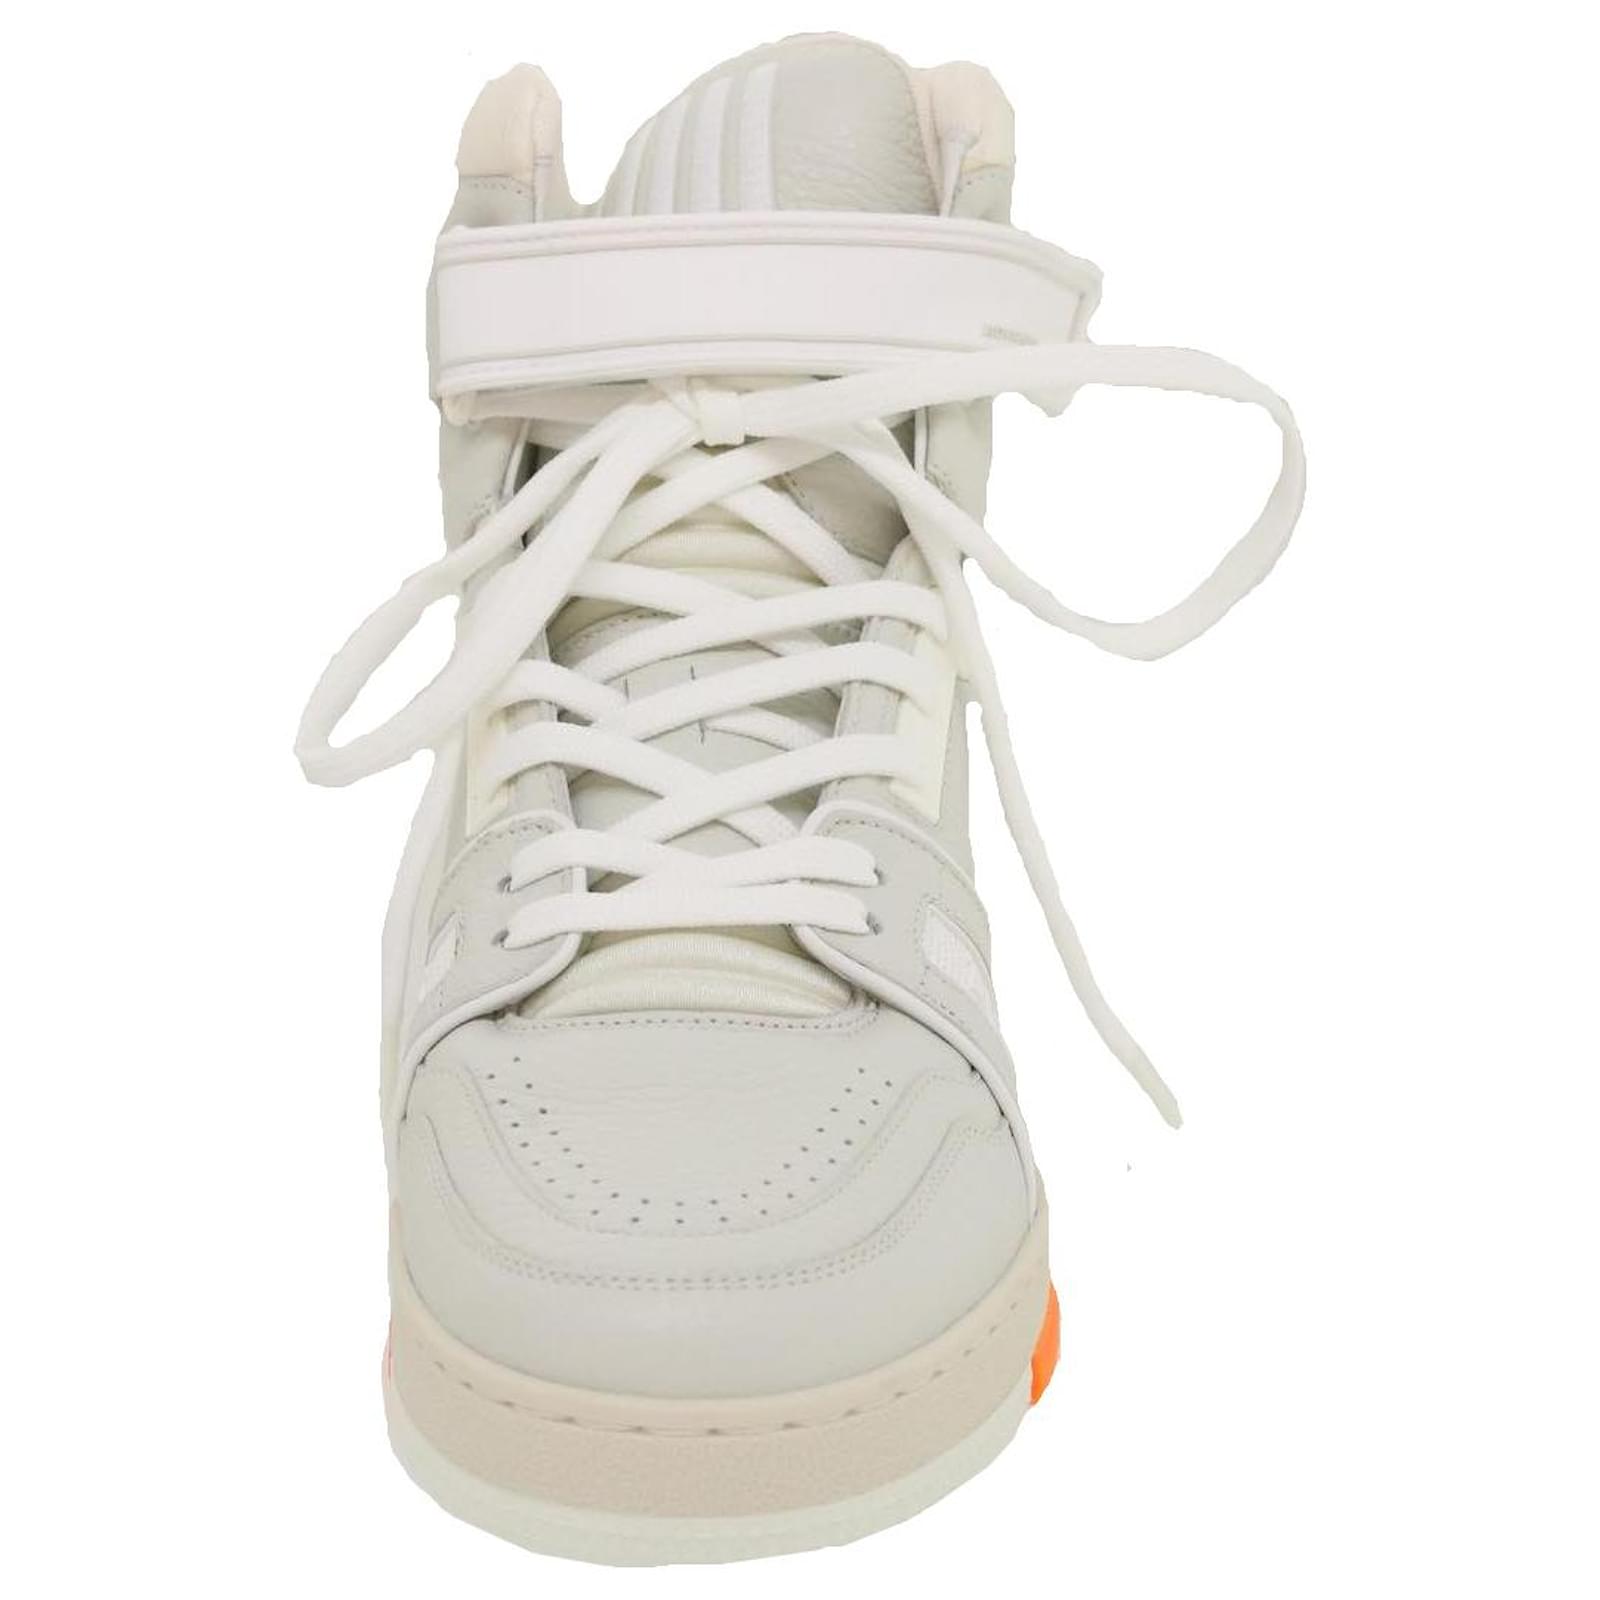 LOUIS VUITTON Trainer sneakers Leather High cut White 1a5a0D LV